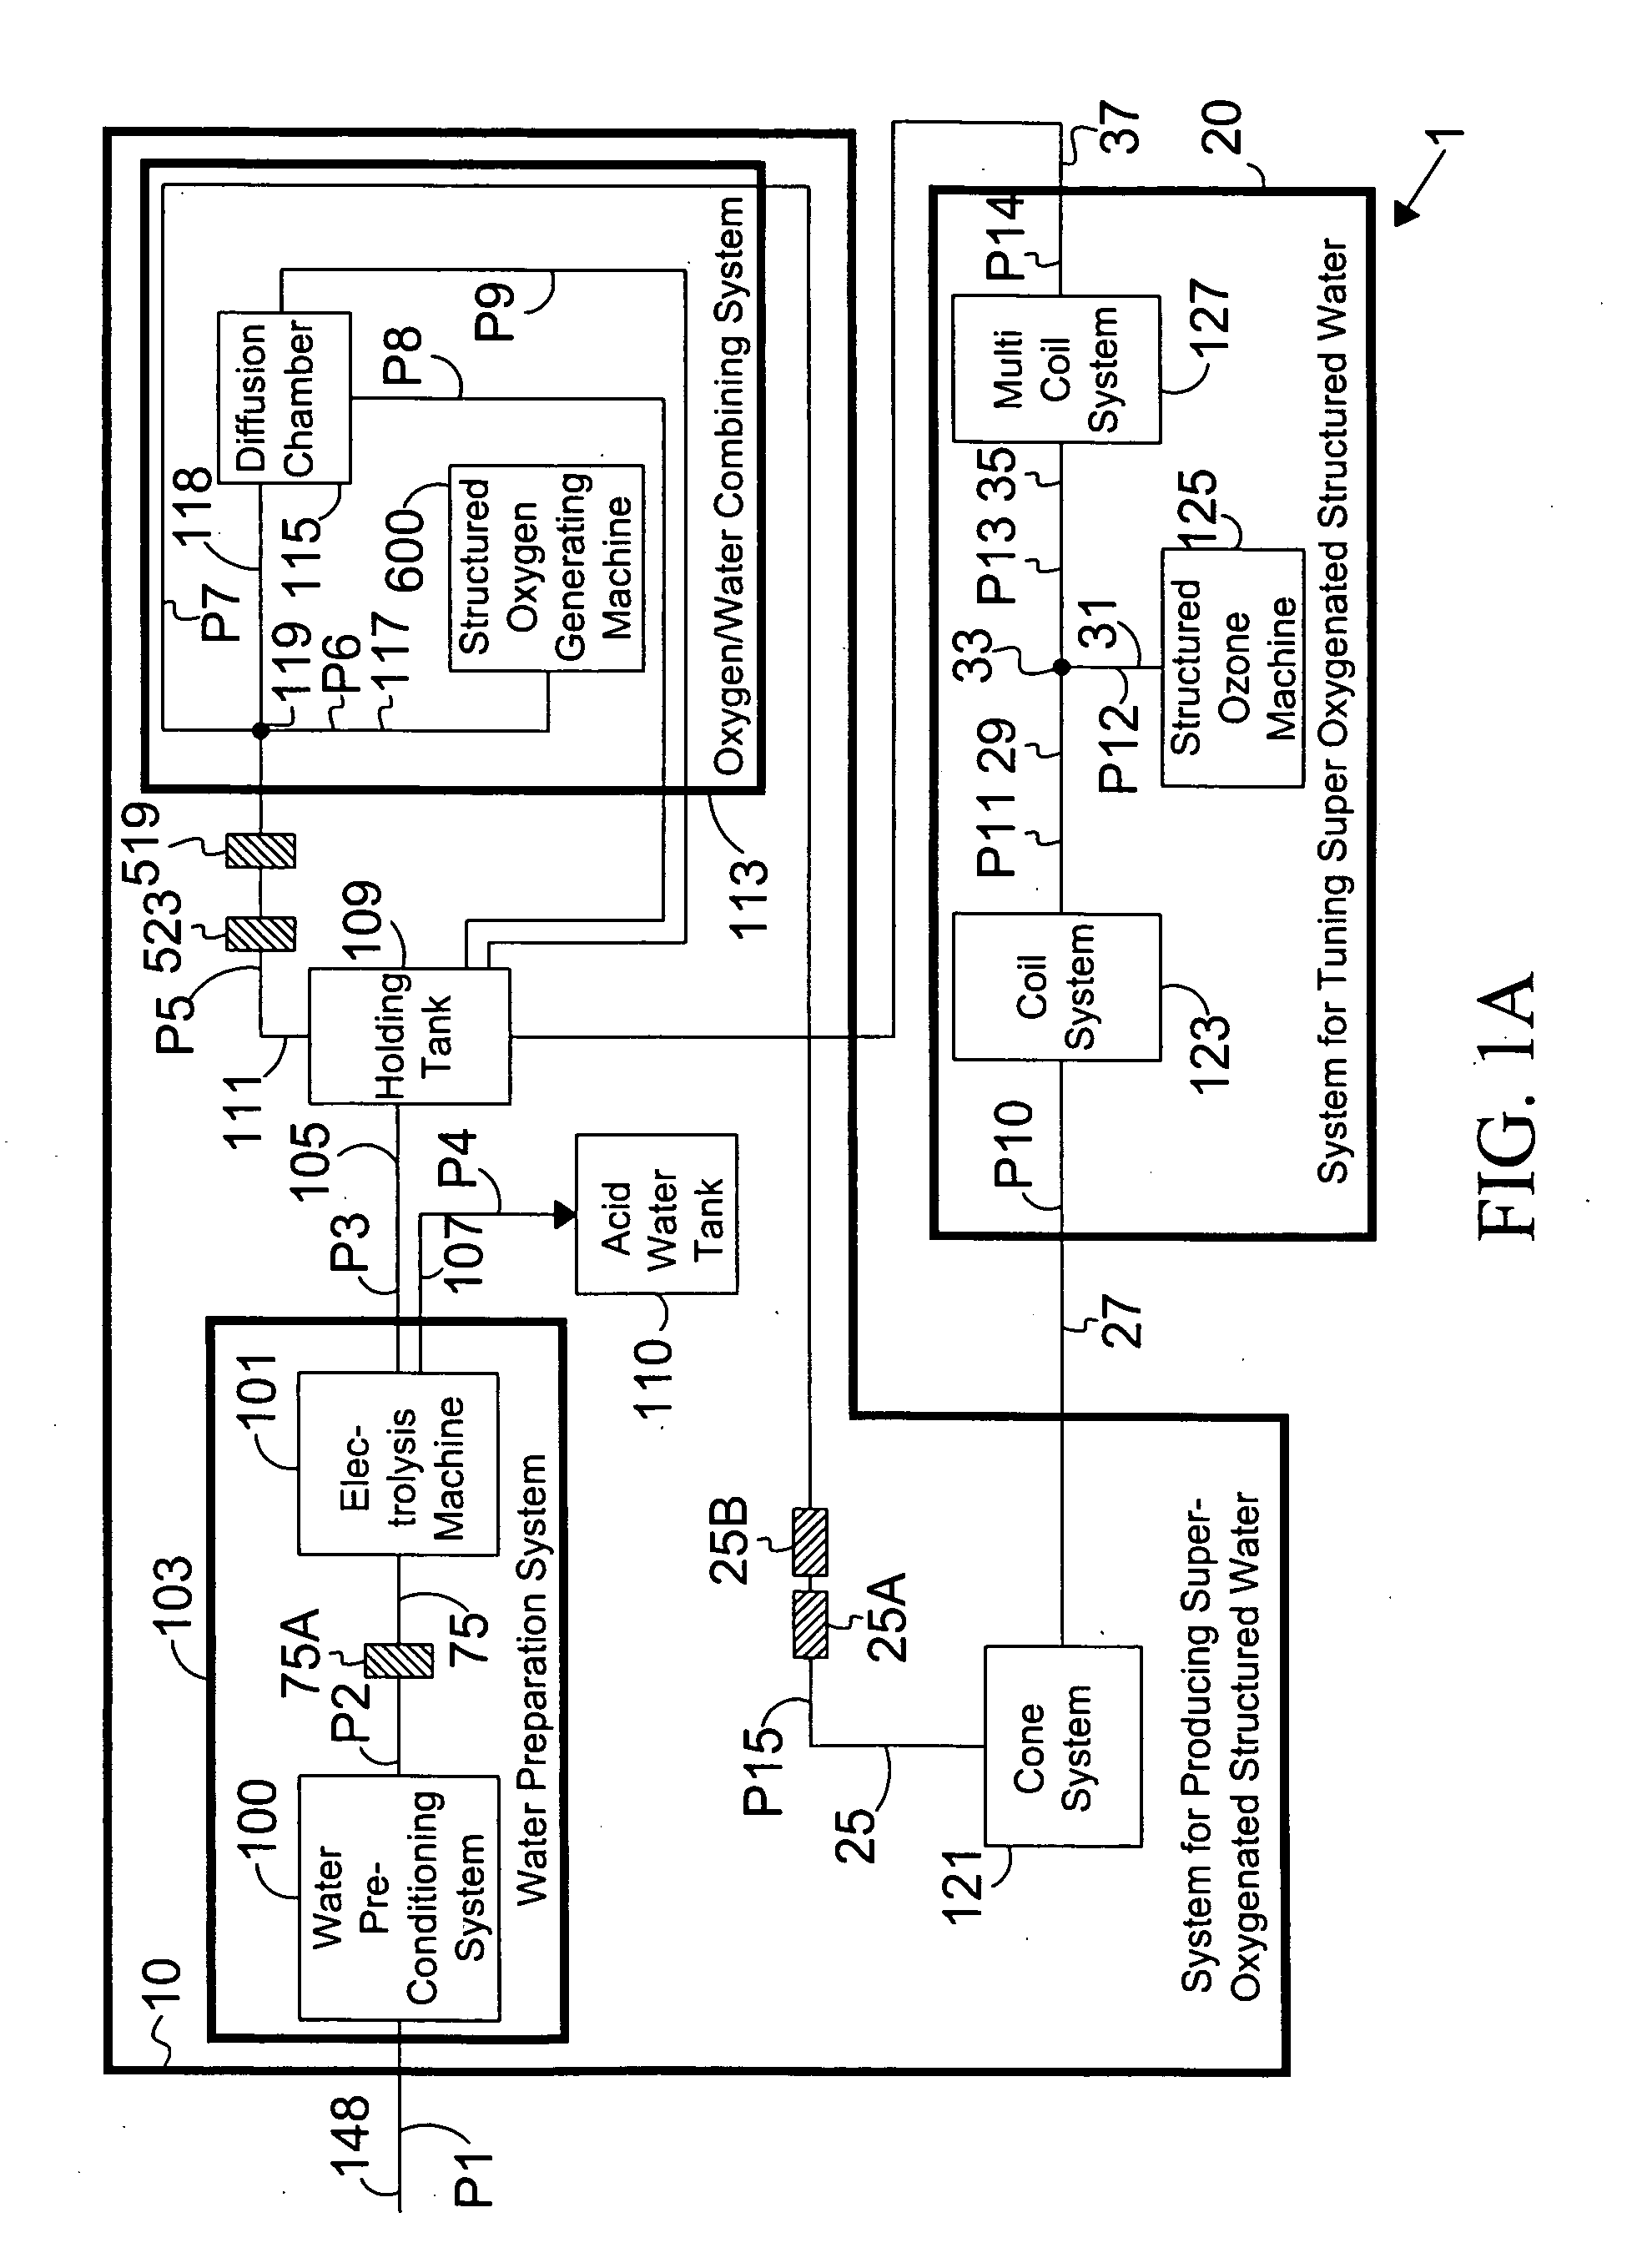 System for preparing oxygenated water with a stable negative oxidation reduction potential (ORP)